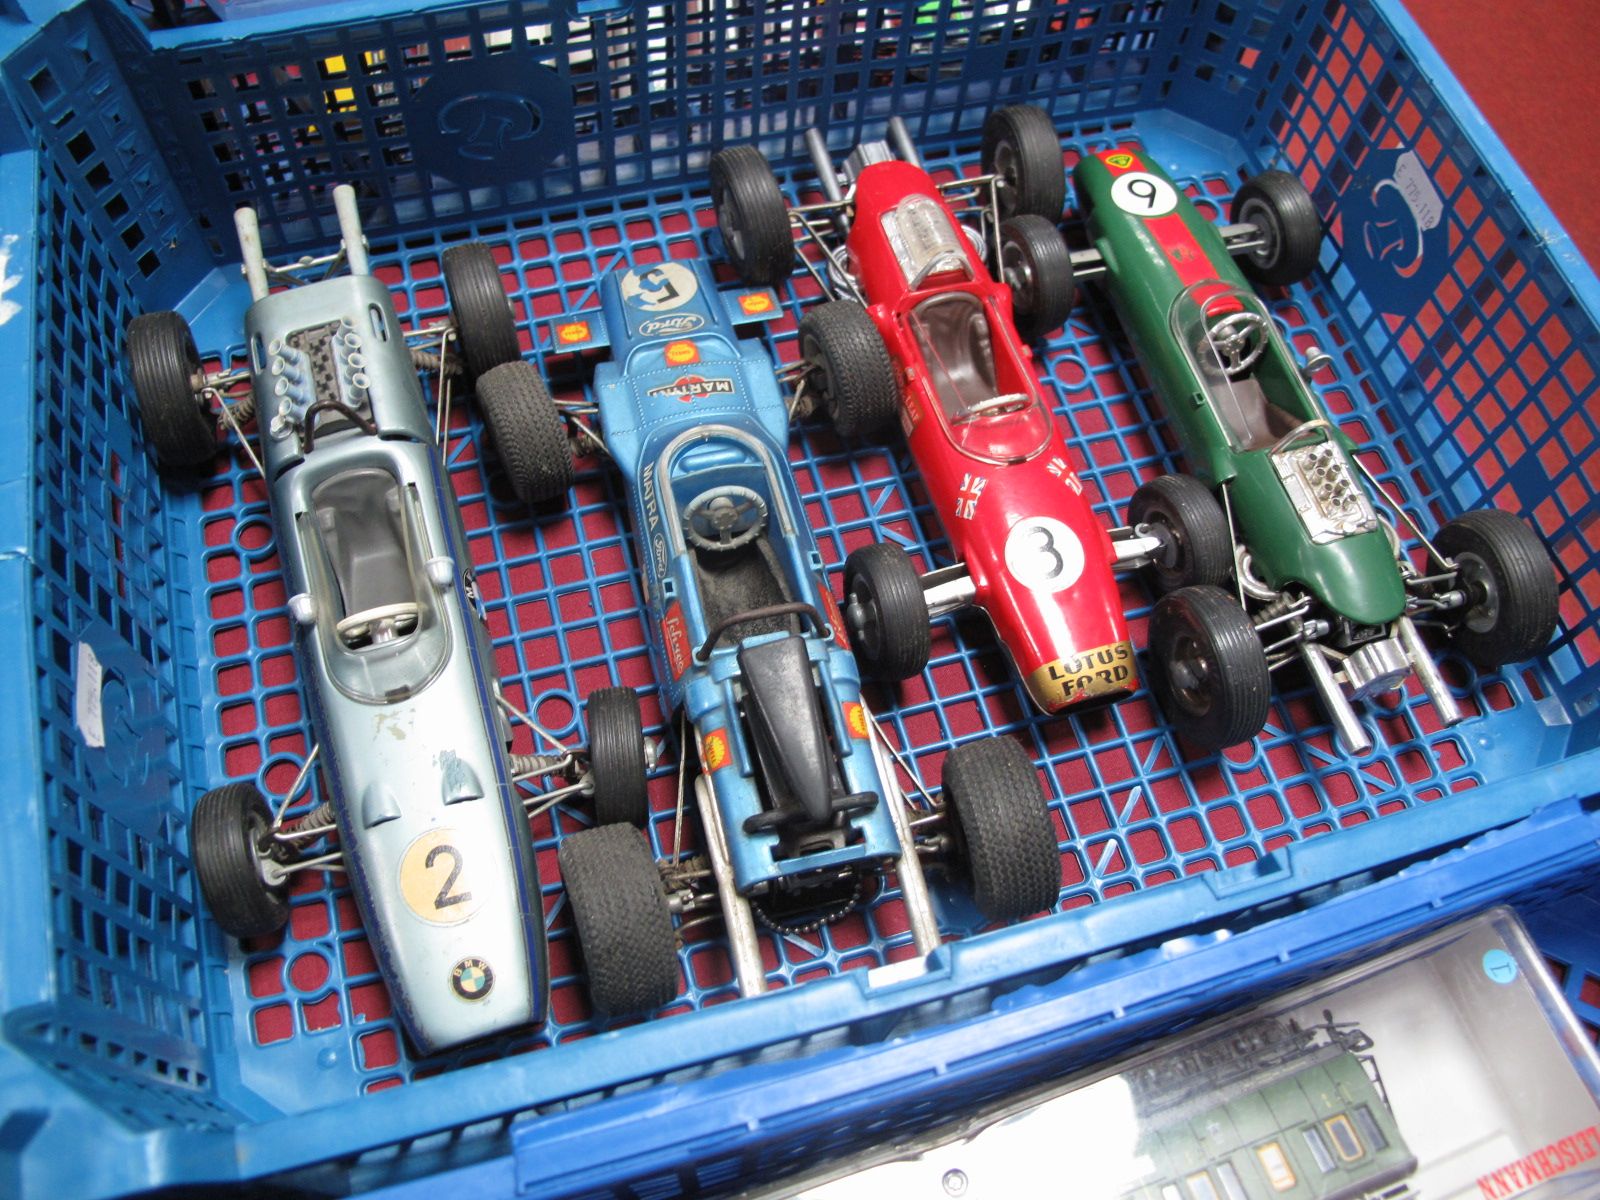 Four Schuco Clockwork Tin Plate and Plastic Race Cars, #1074 Matra Ford Formula One #5 (missing wing